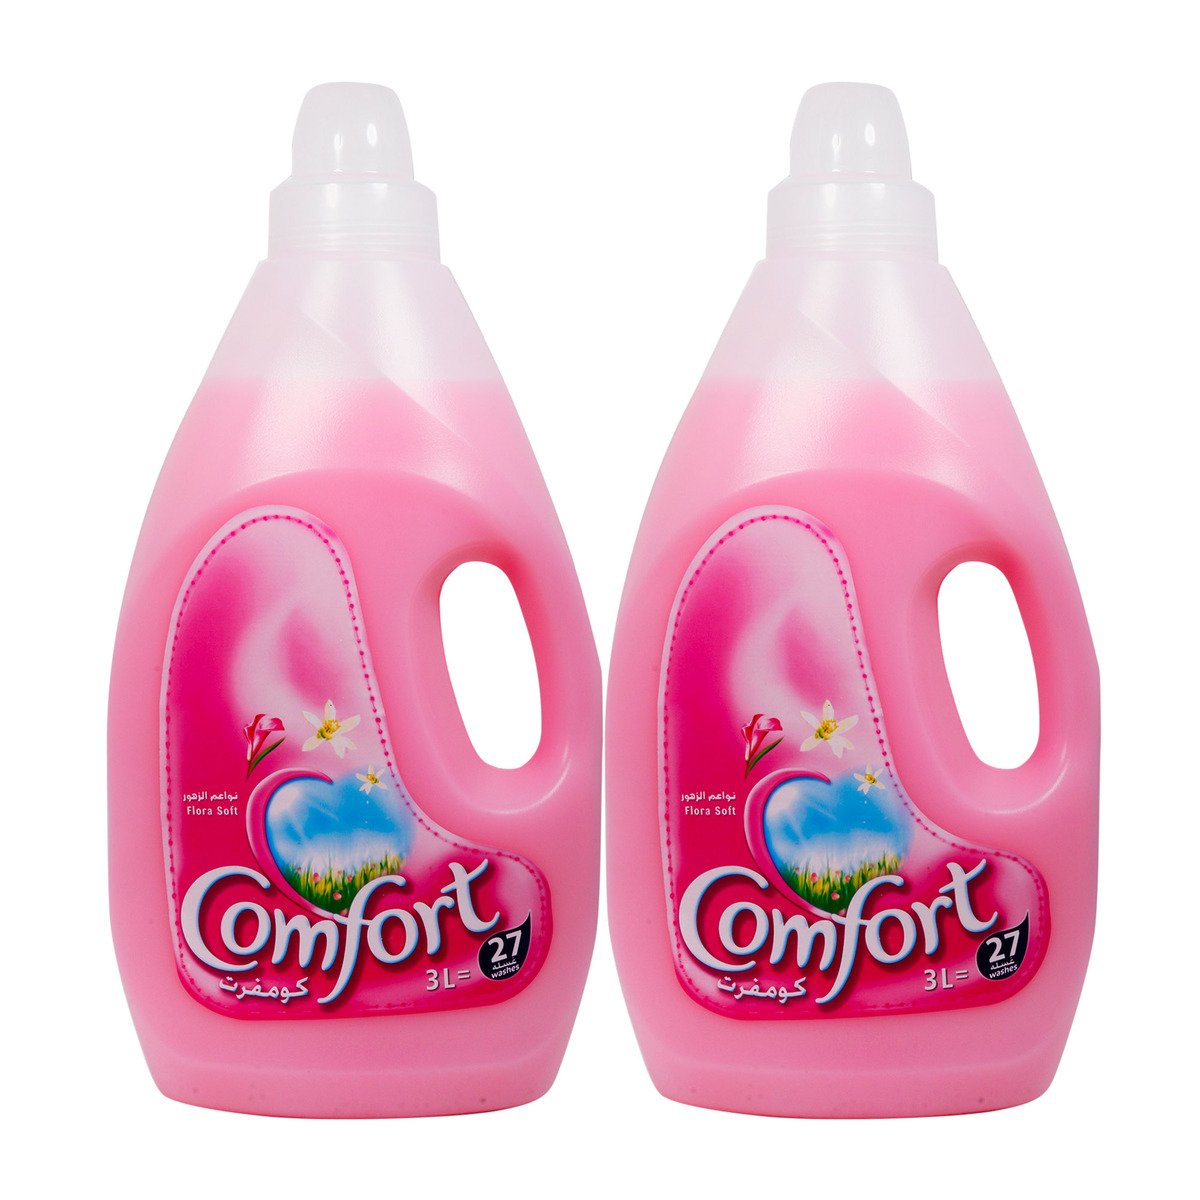 Buy Comfort Fabric Softener Pink 2 x 3Litre Online at Best Price | Fabric Softner Dilut | Lulu Kuwait in Kuwait